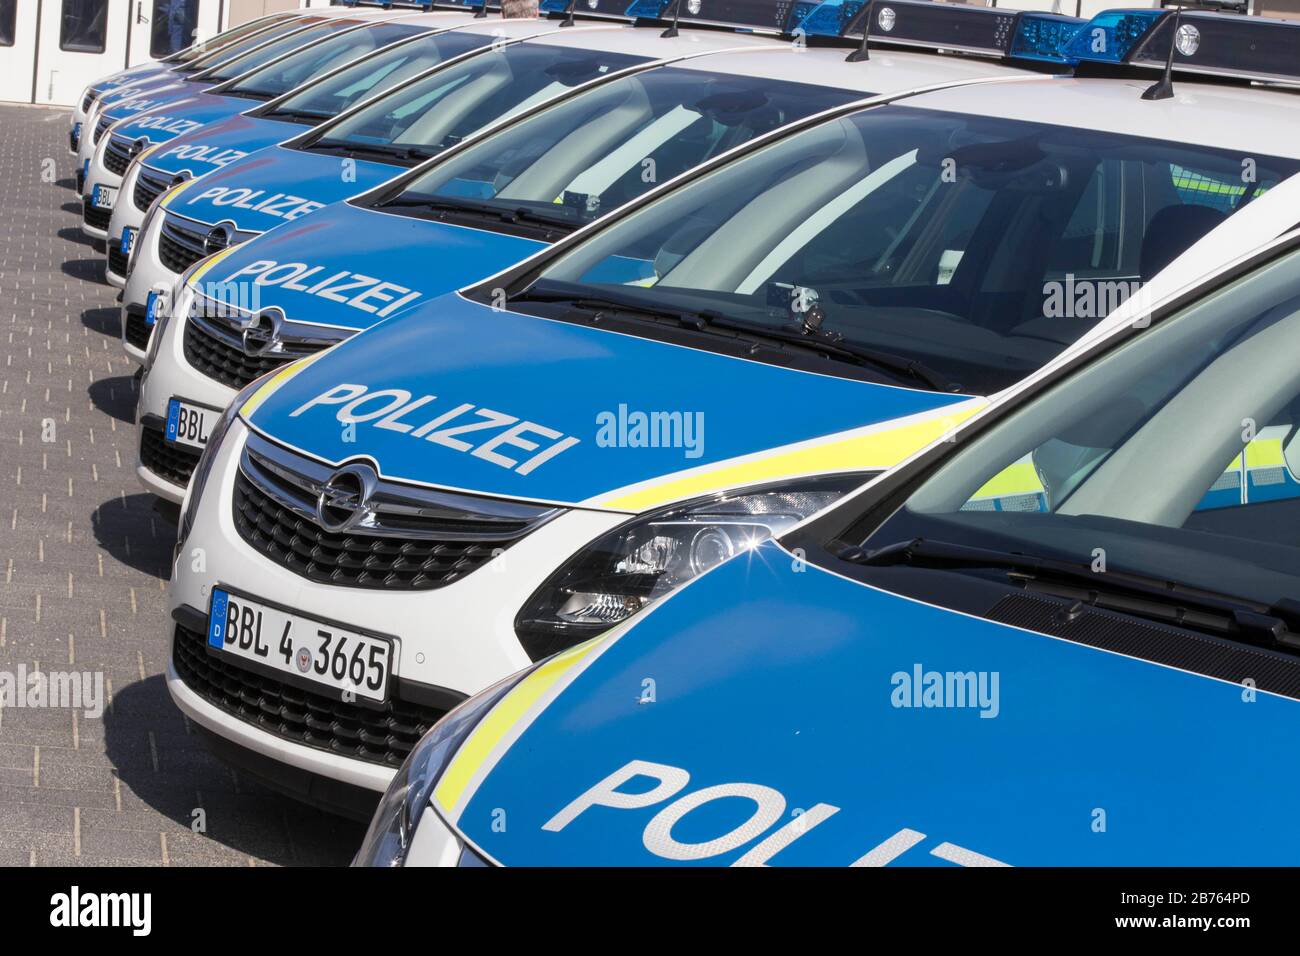 New radio patrol cars will be available at the police station in Potsdam on  14.03.16. Brandenburg's police received 28 Opel "Zafira Tourer" compact  vans. The radio patrol cars are intended for the